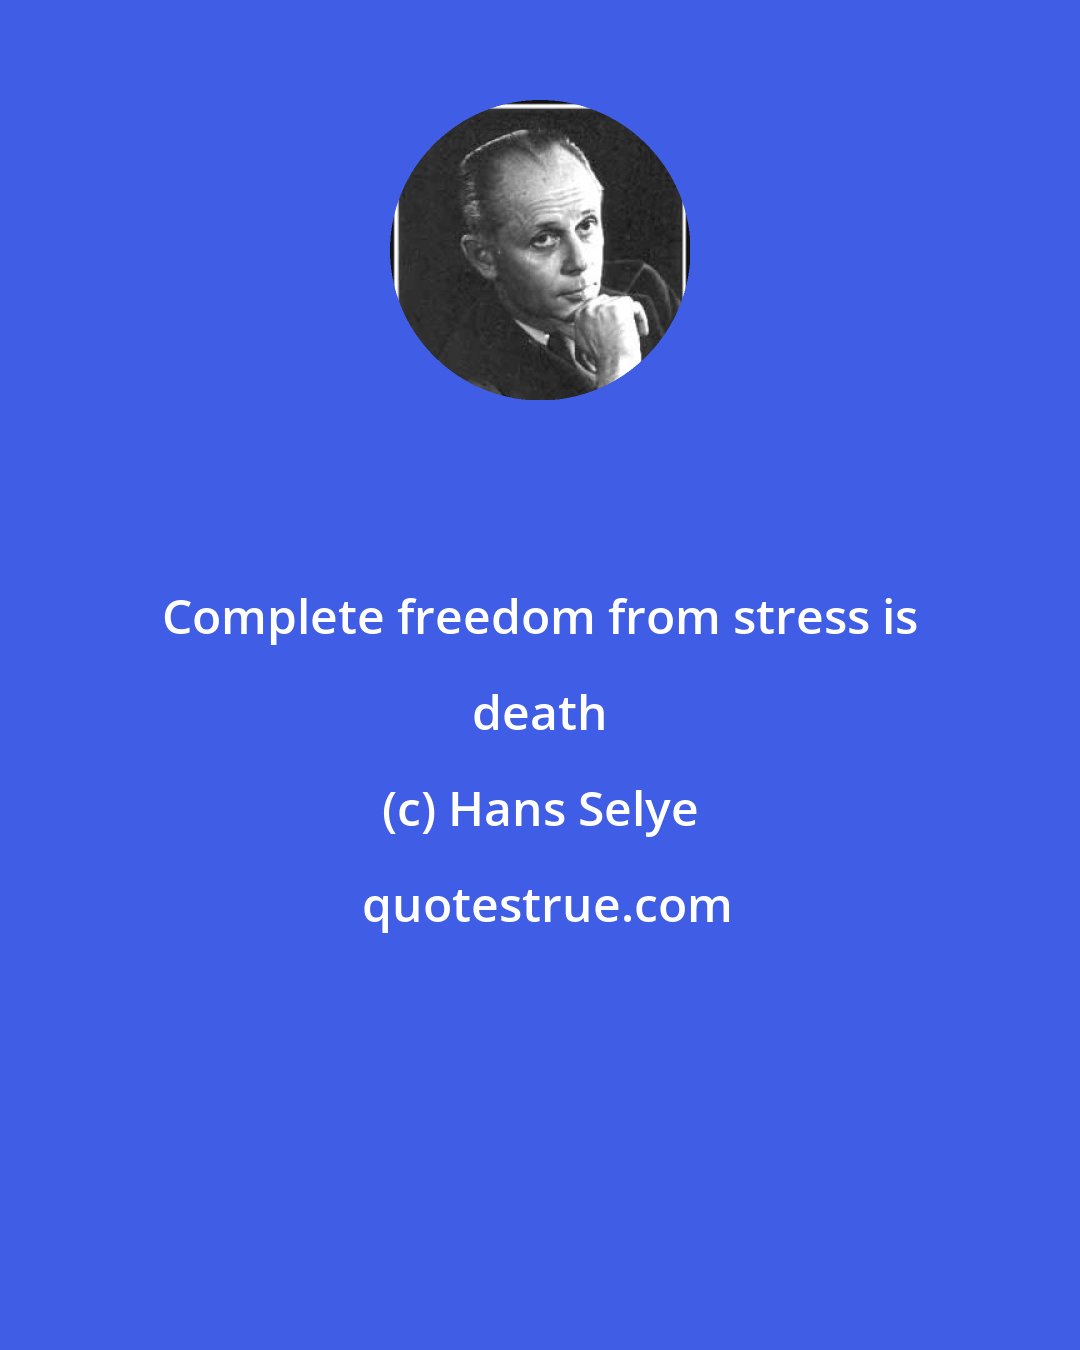 Hans Selye: Complete freedom from stress is death